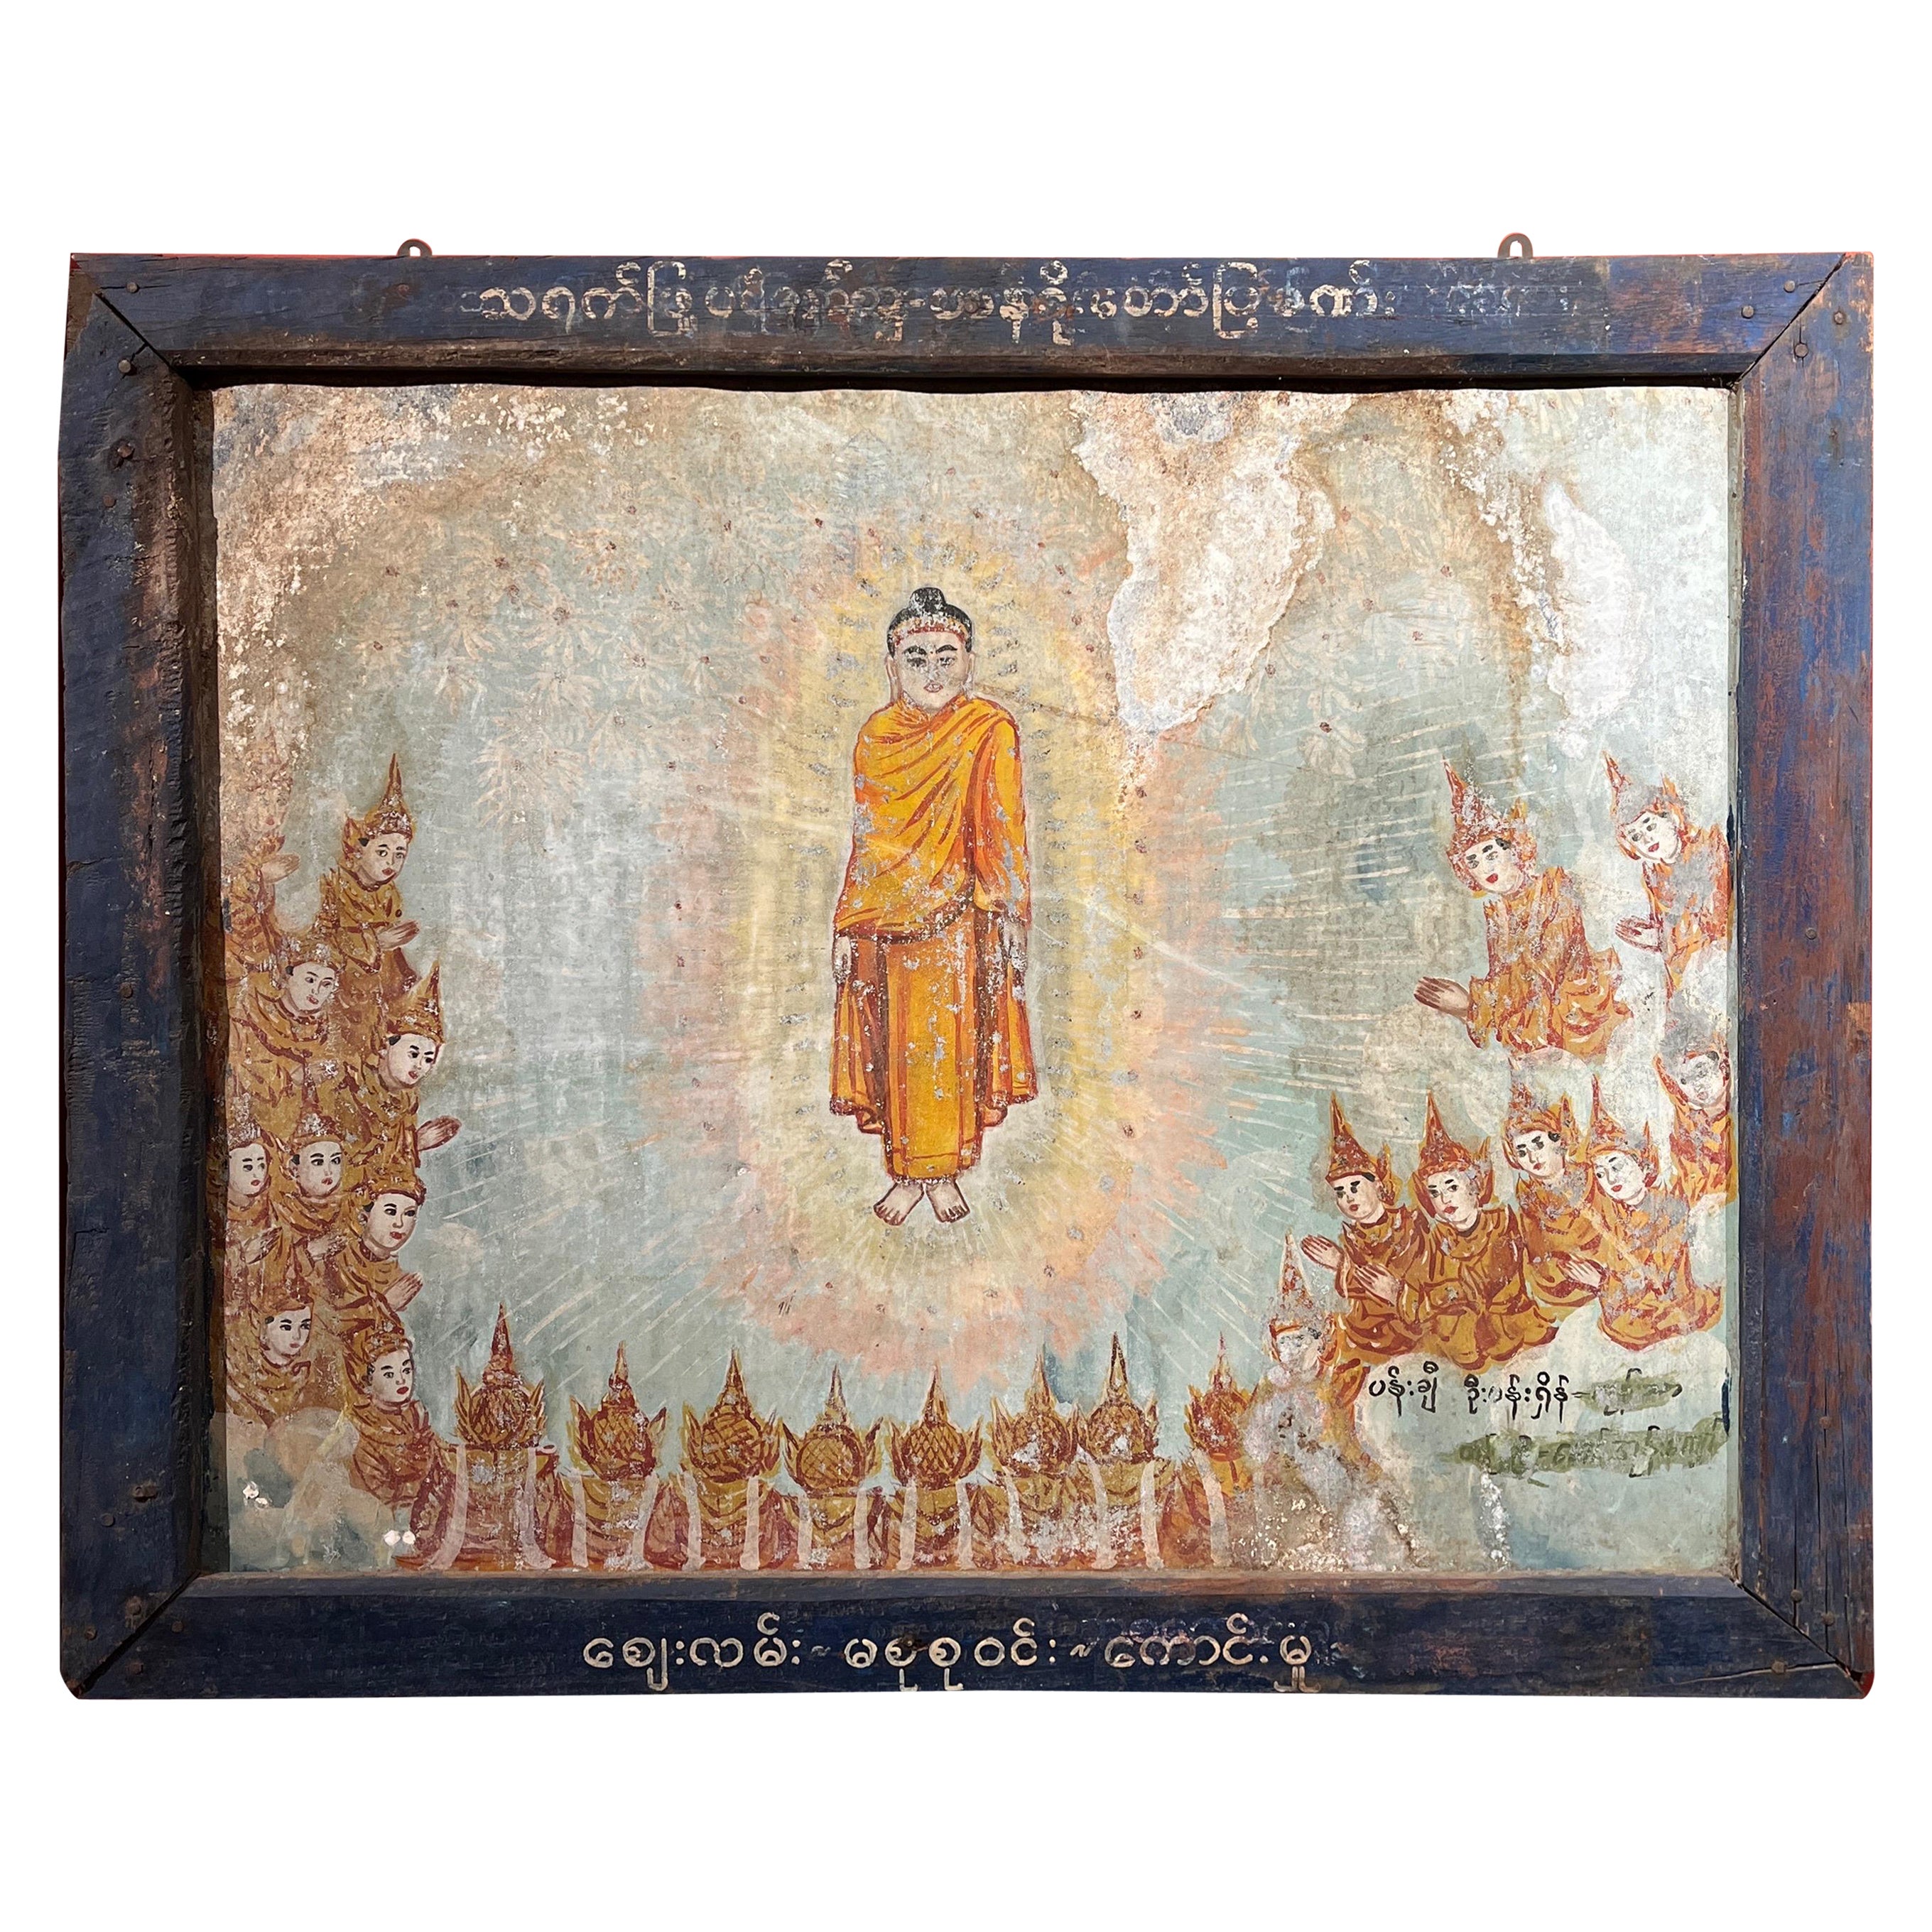 Antique Burmese Temple Painting on Tin